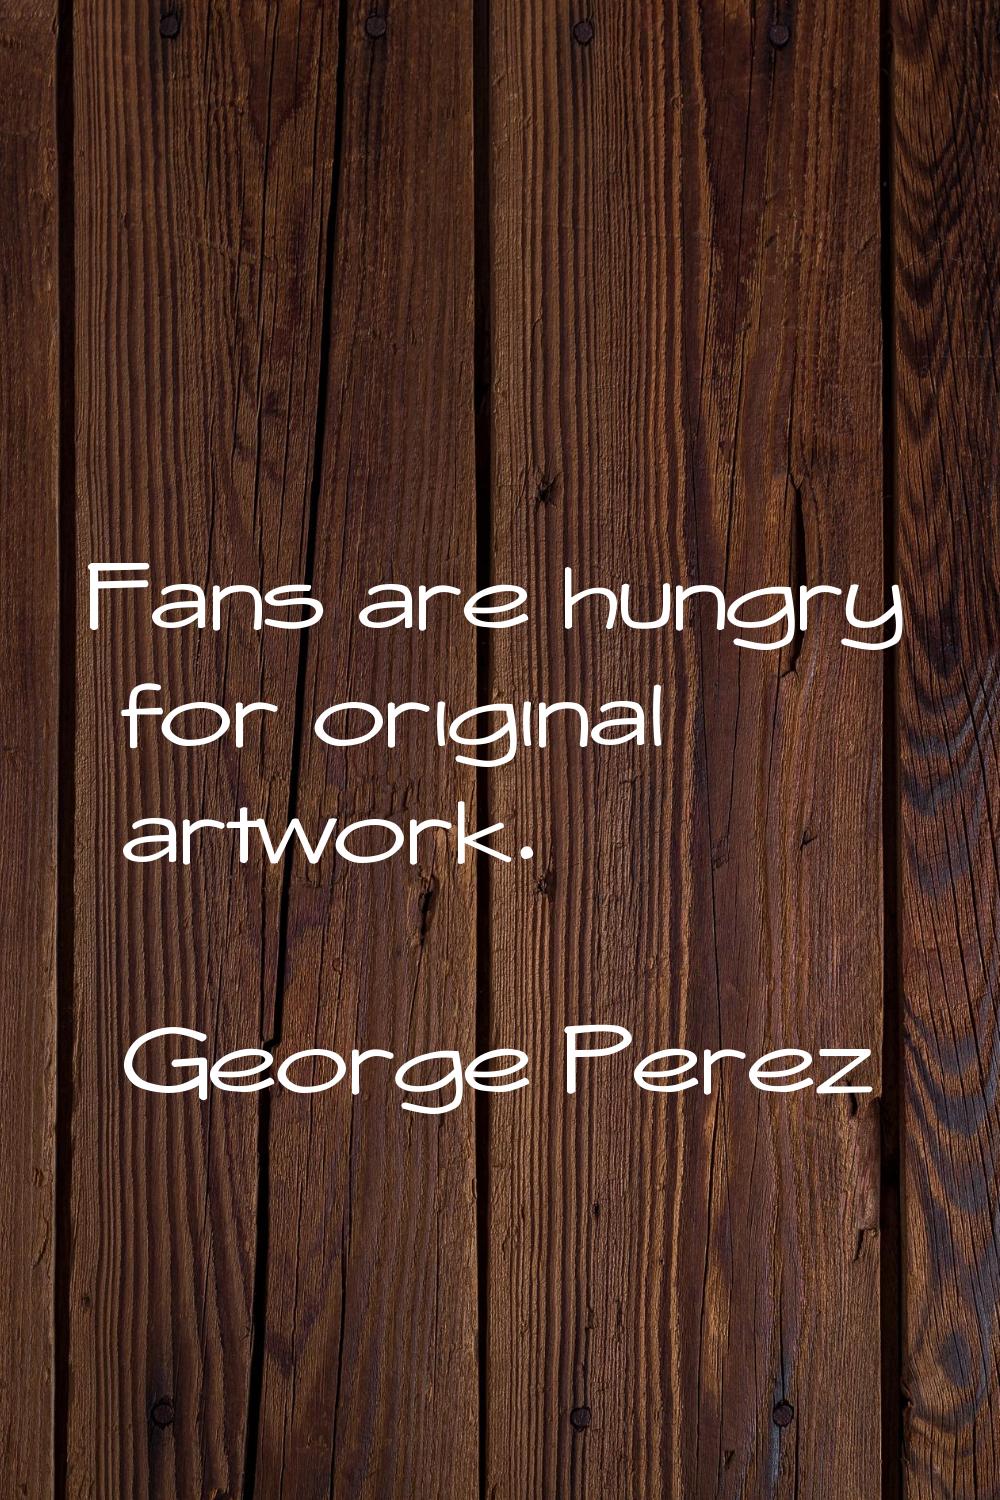 Fans are hungry for original artwork.